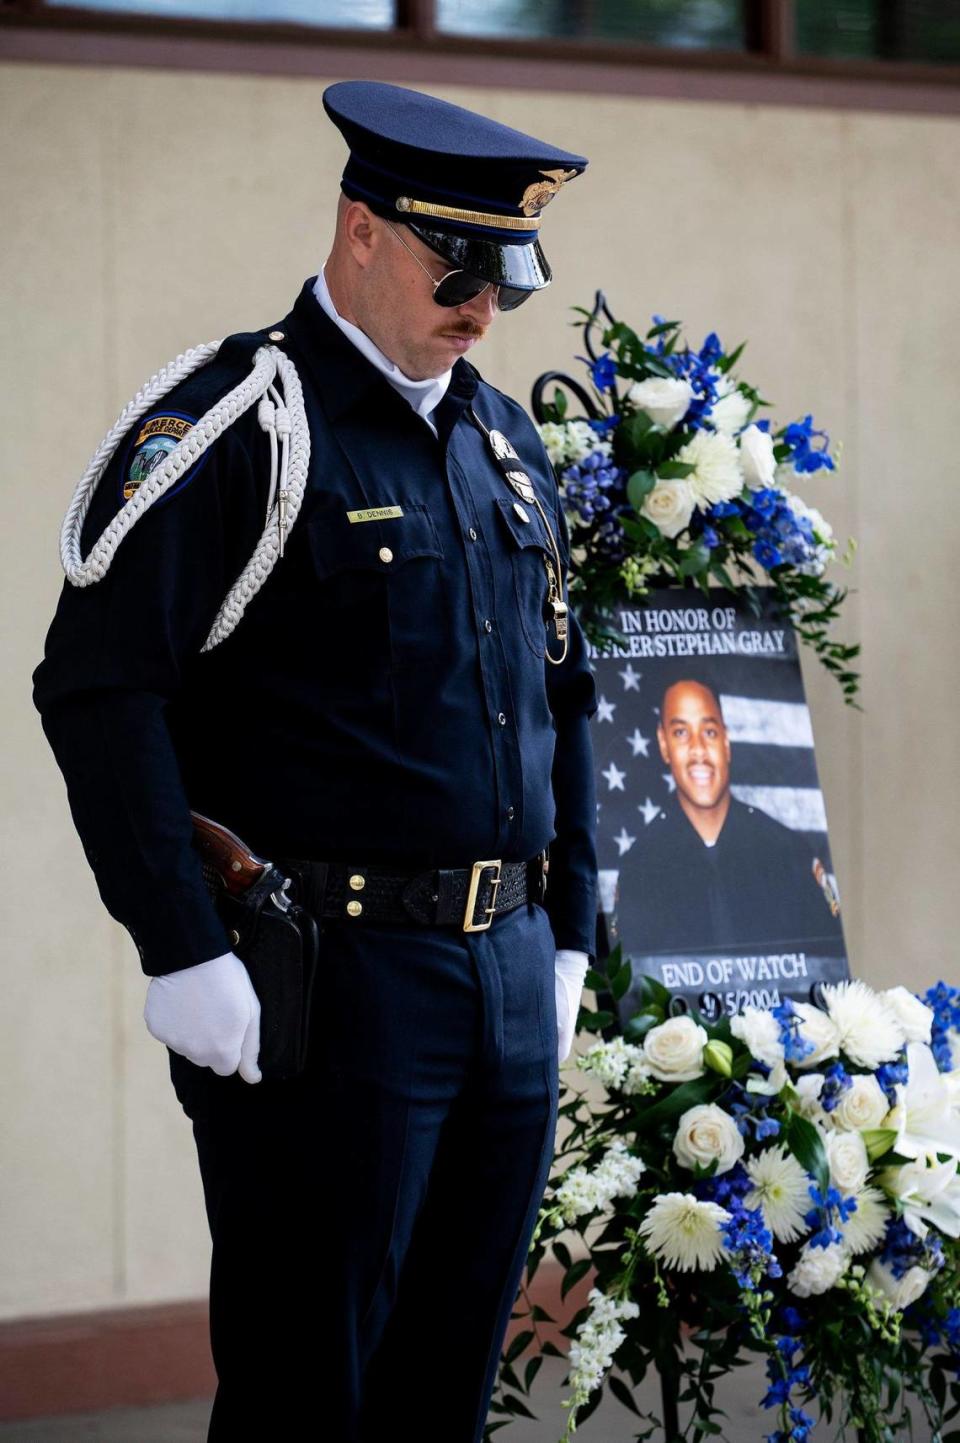 A Merced police officers stands near a photo of fallen Merced police officer Stephan Gray as a moment of silence is observed during an annual ceremony to honor Gray at the Merced Police Station in Merced, Calif., on Monday, April 15, 2024. Gray was shot and killed in the line of duty on April 15, 2004.